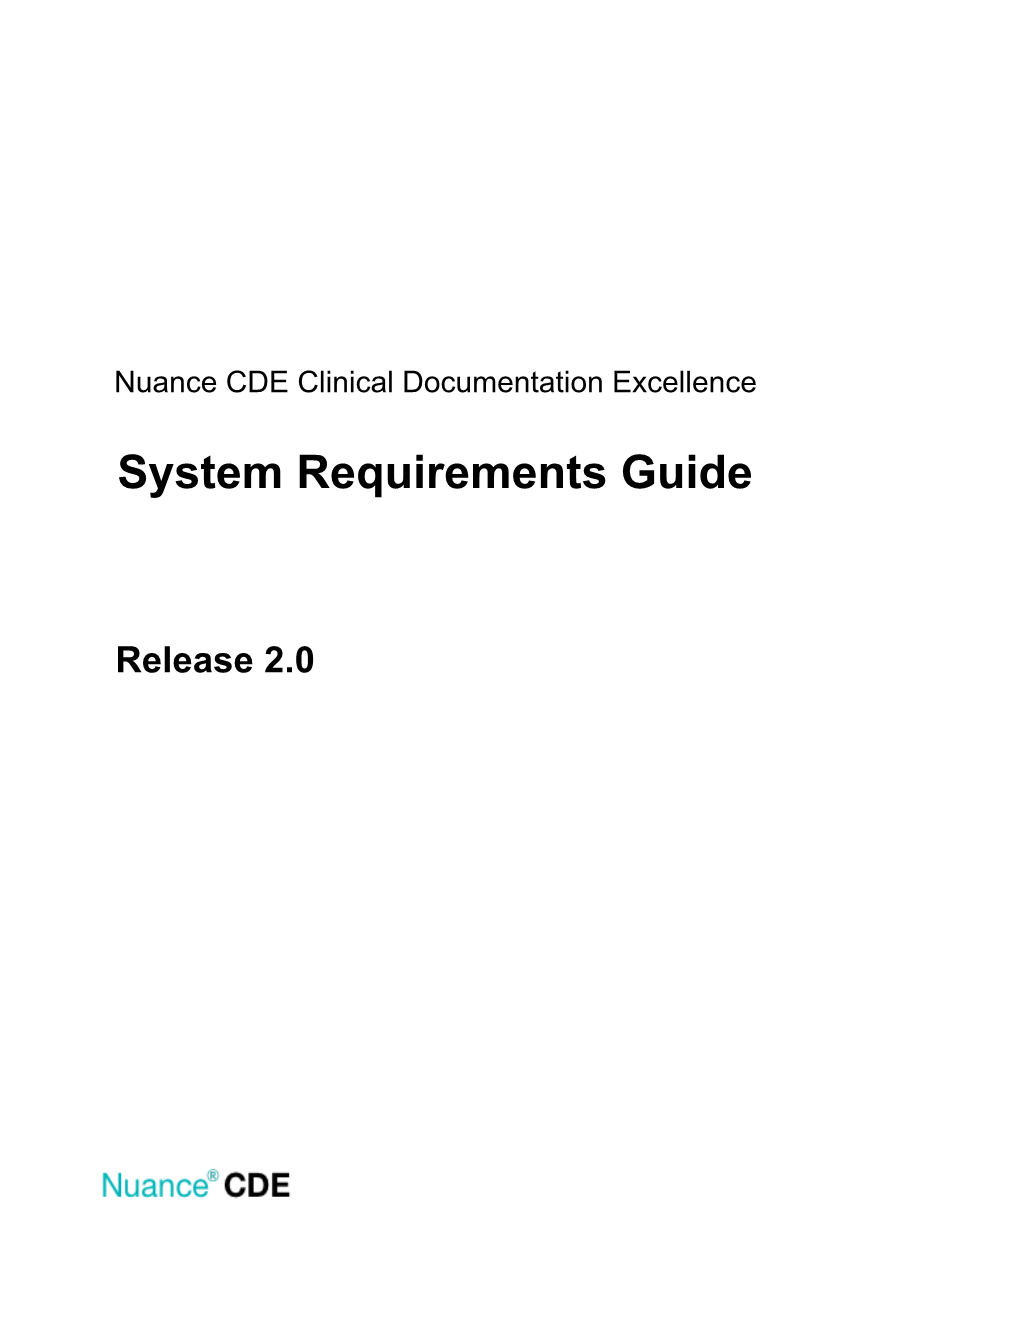 Nuance CDE System Requirements